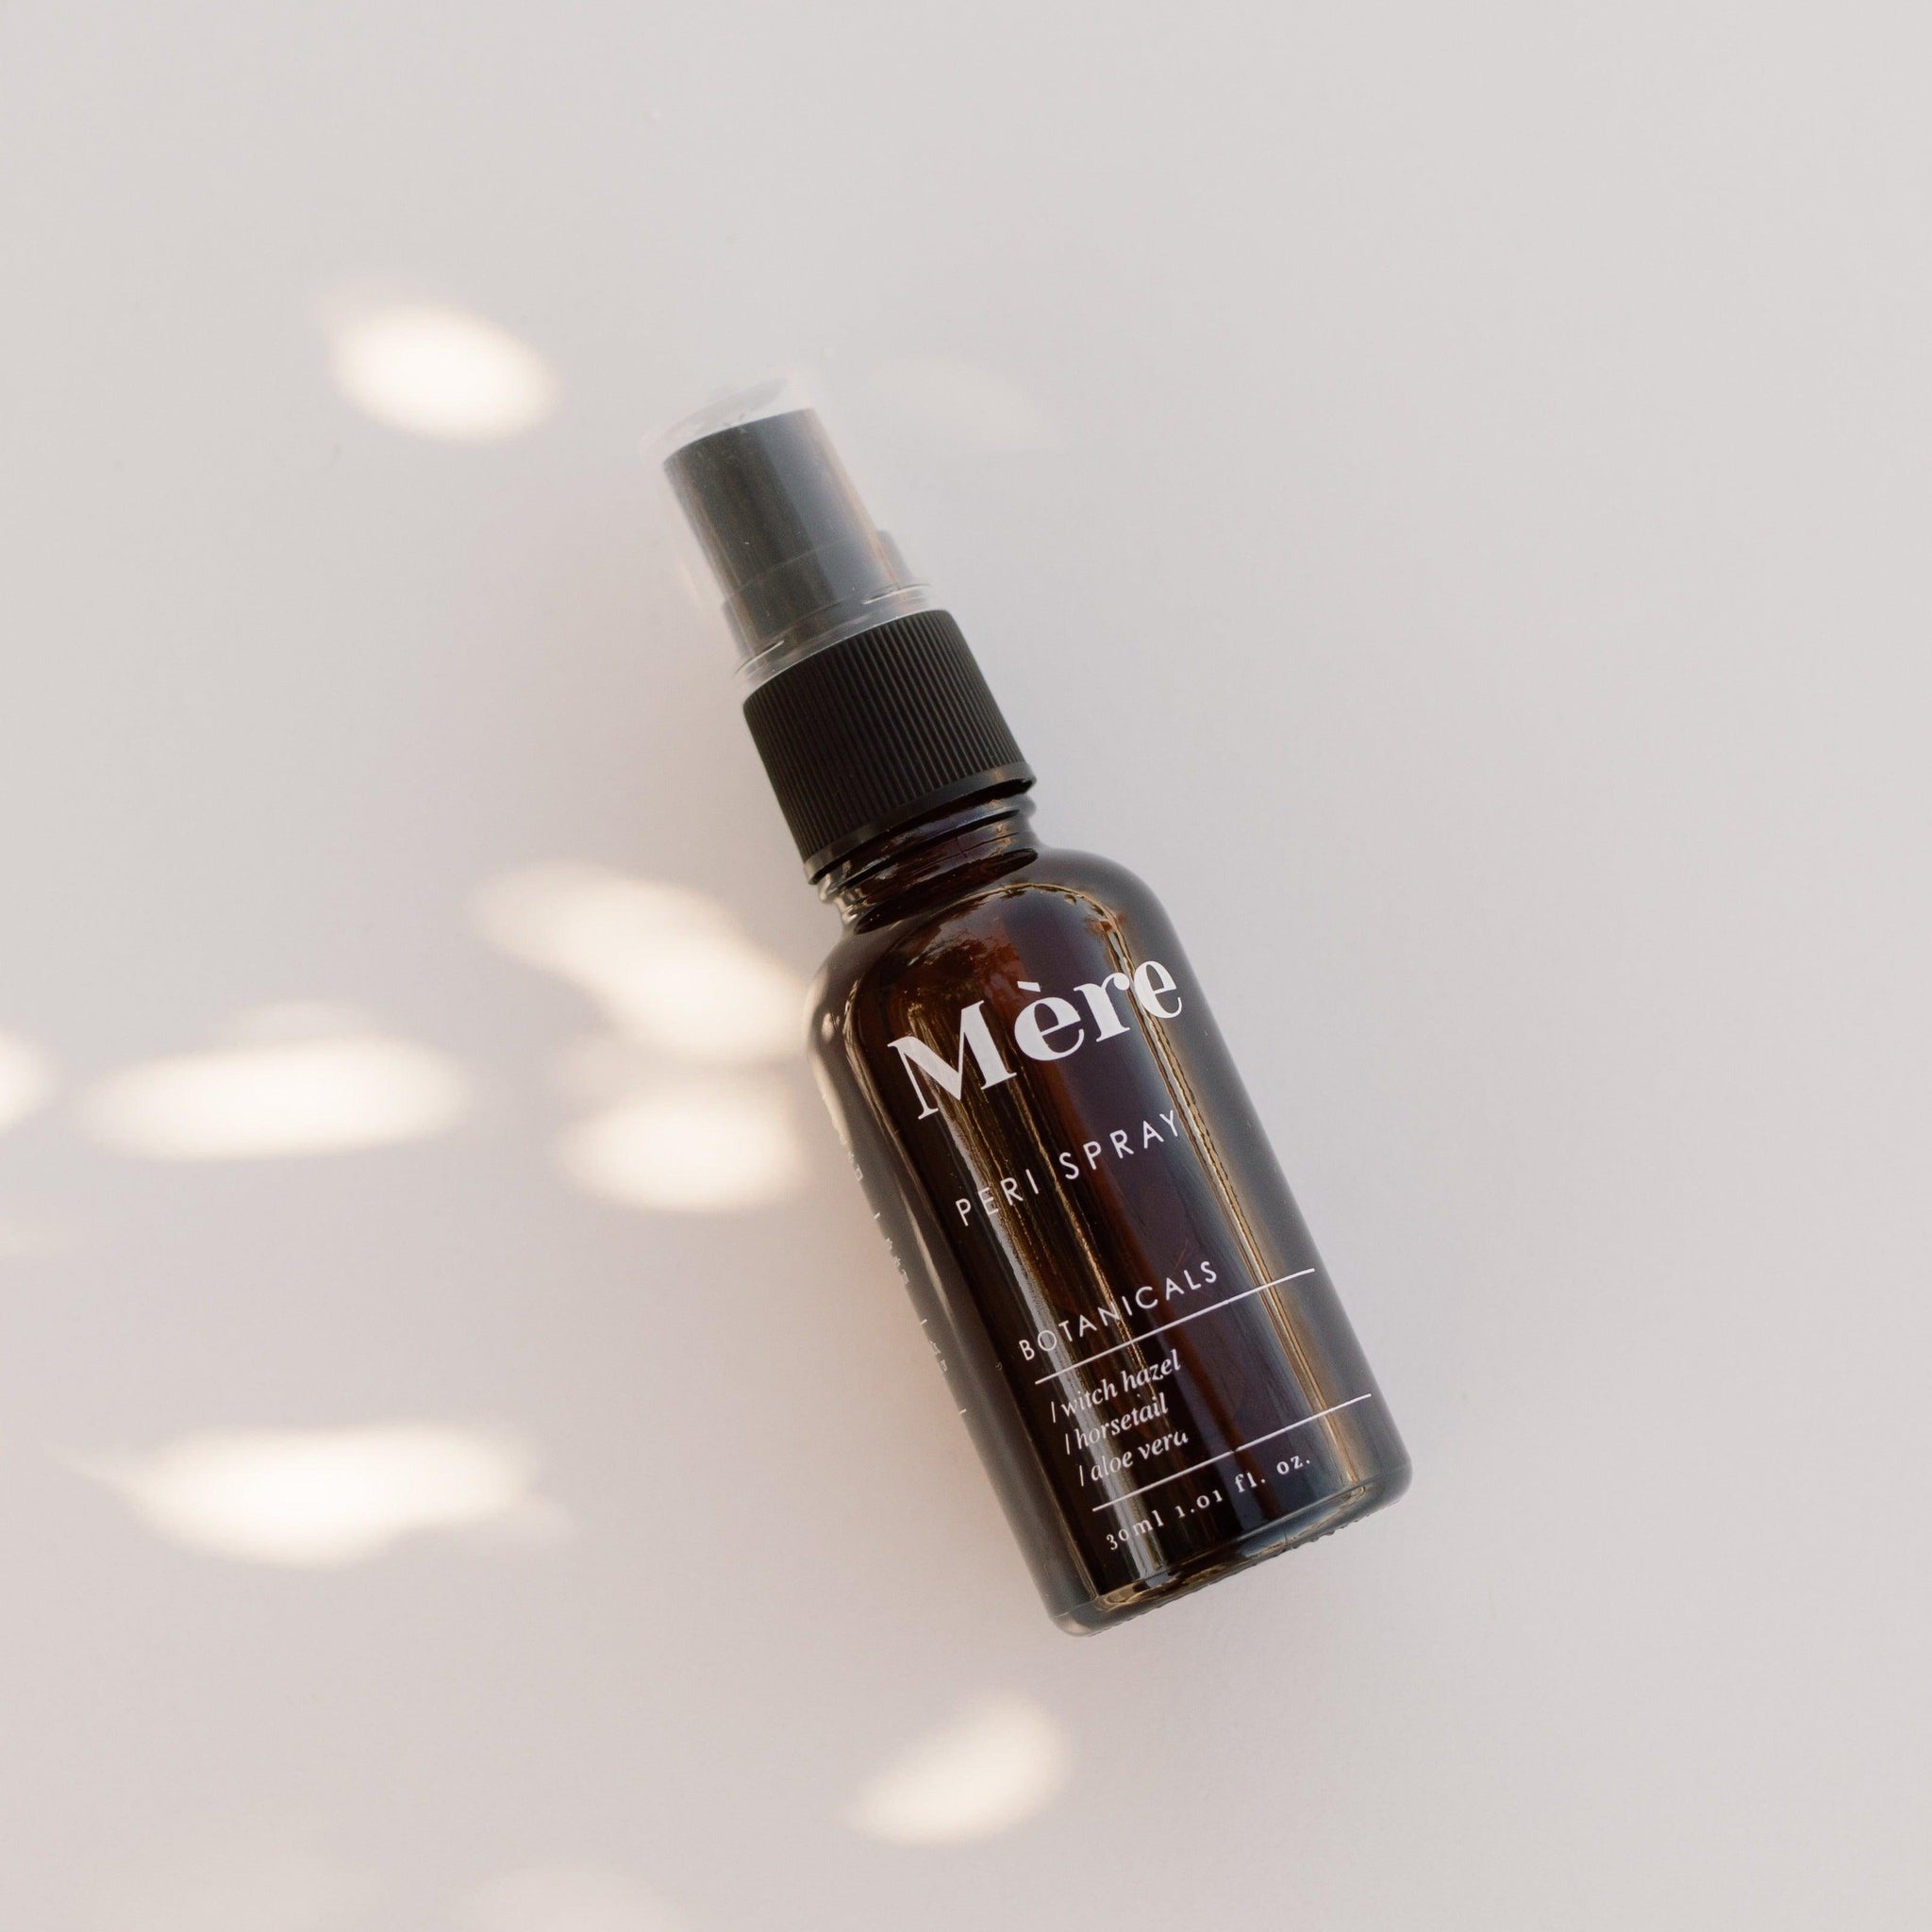 Healing Peri Spray has been designed by a Naturopath to help gently ease and sooth personal discomfort after the birth. Our Peri spray in a nourishing solution formulated to keep your perineum clean, toned, refreshed and comfortable post birth.